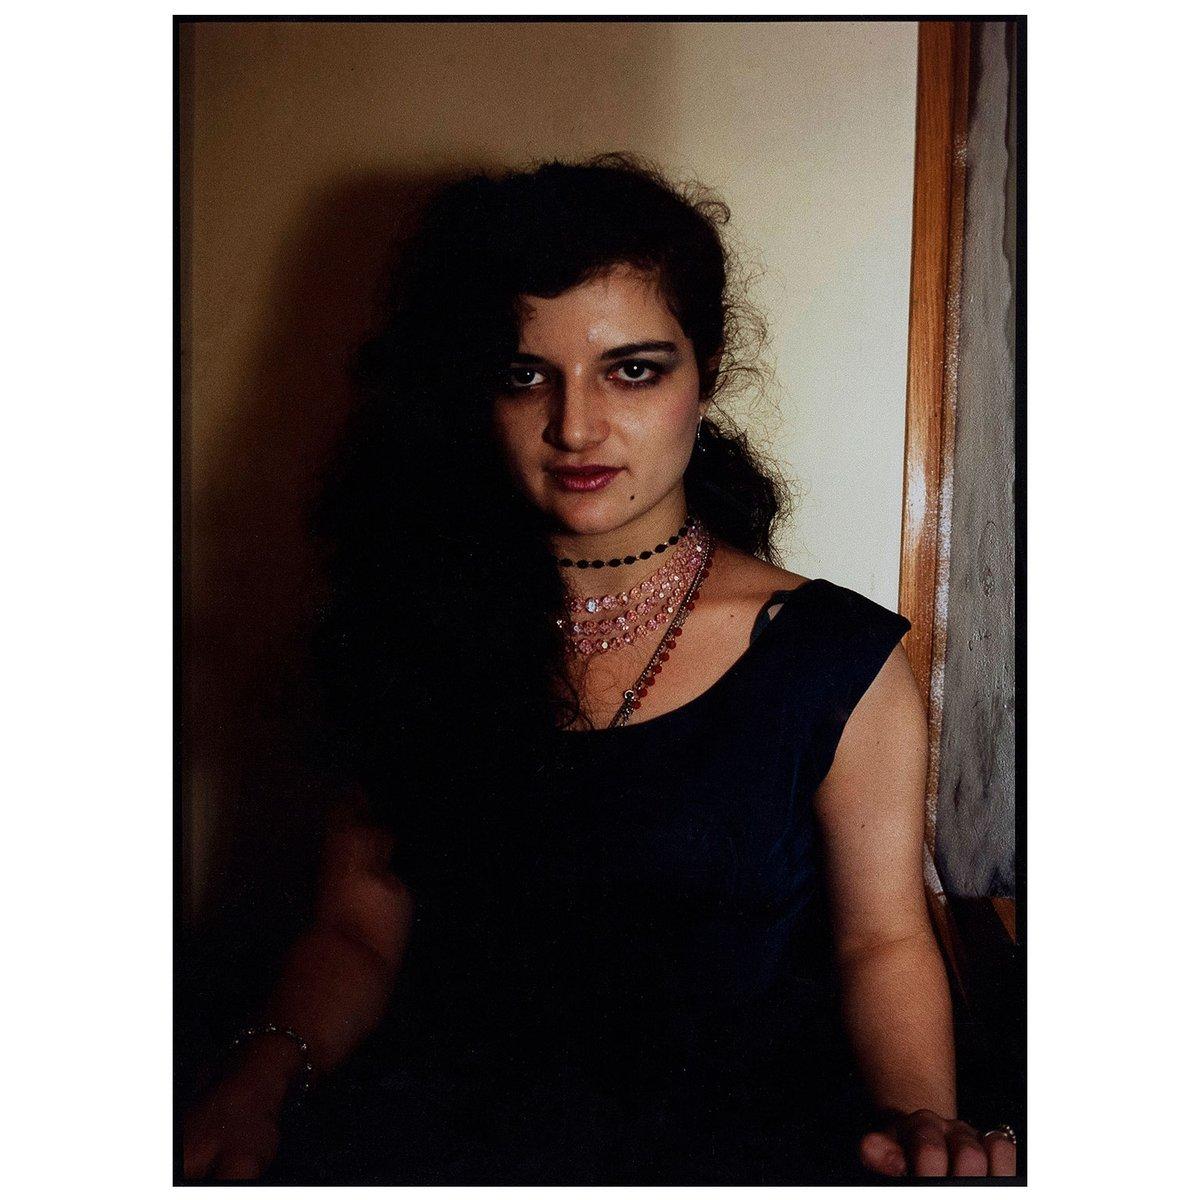 Nan Goldin (b. 1953) is unquestionably one of the most influential photographers of the 20th century.    

A successor to Diane Arbus, her aesthetic, creative approach and contribution to color photography has had a tremendous impact on both the